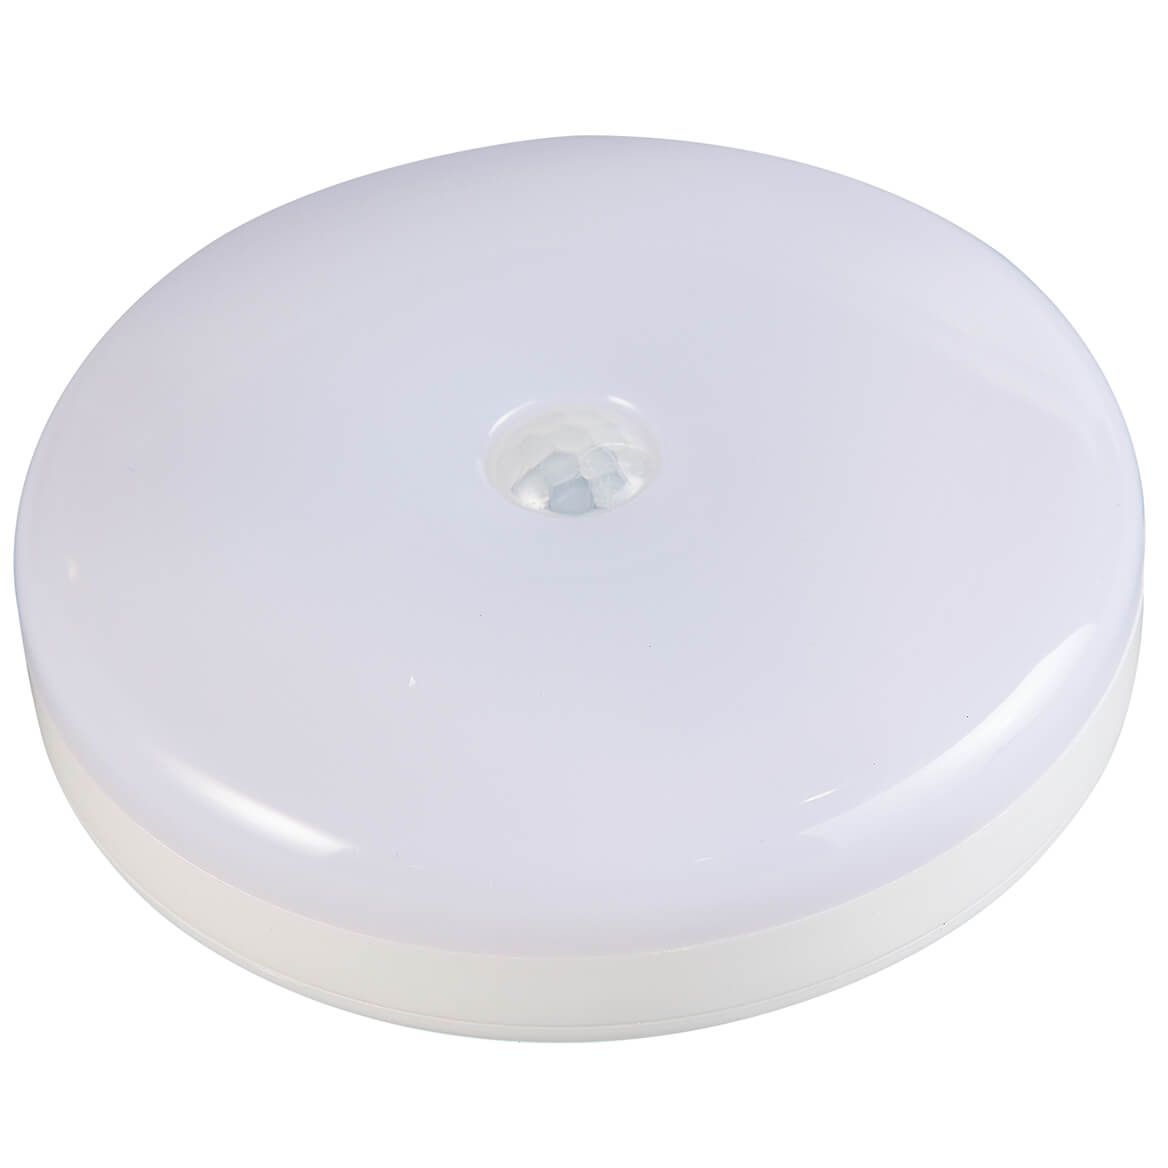 Battery-Operated Motion Sensing LED Puck Light + '-' + 374681